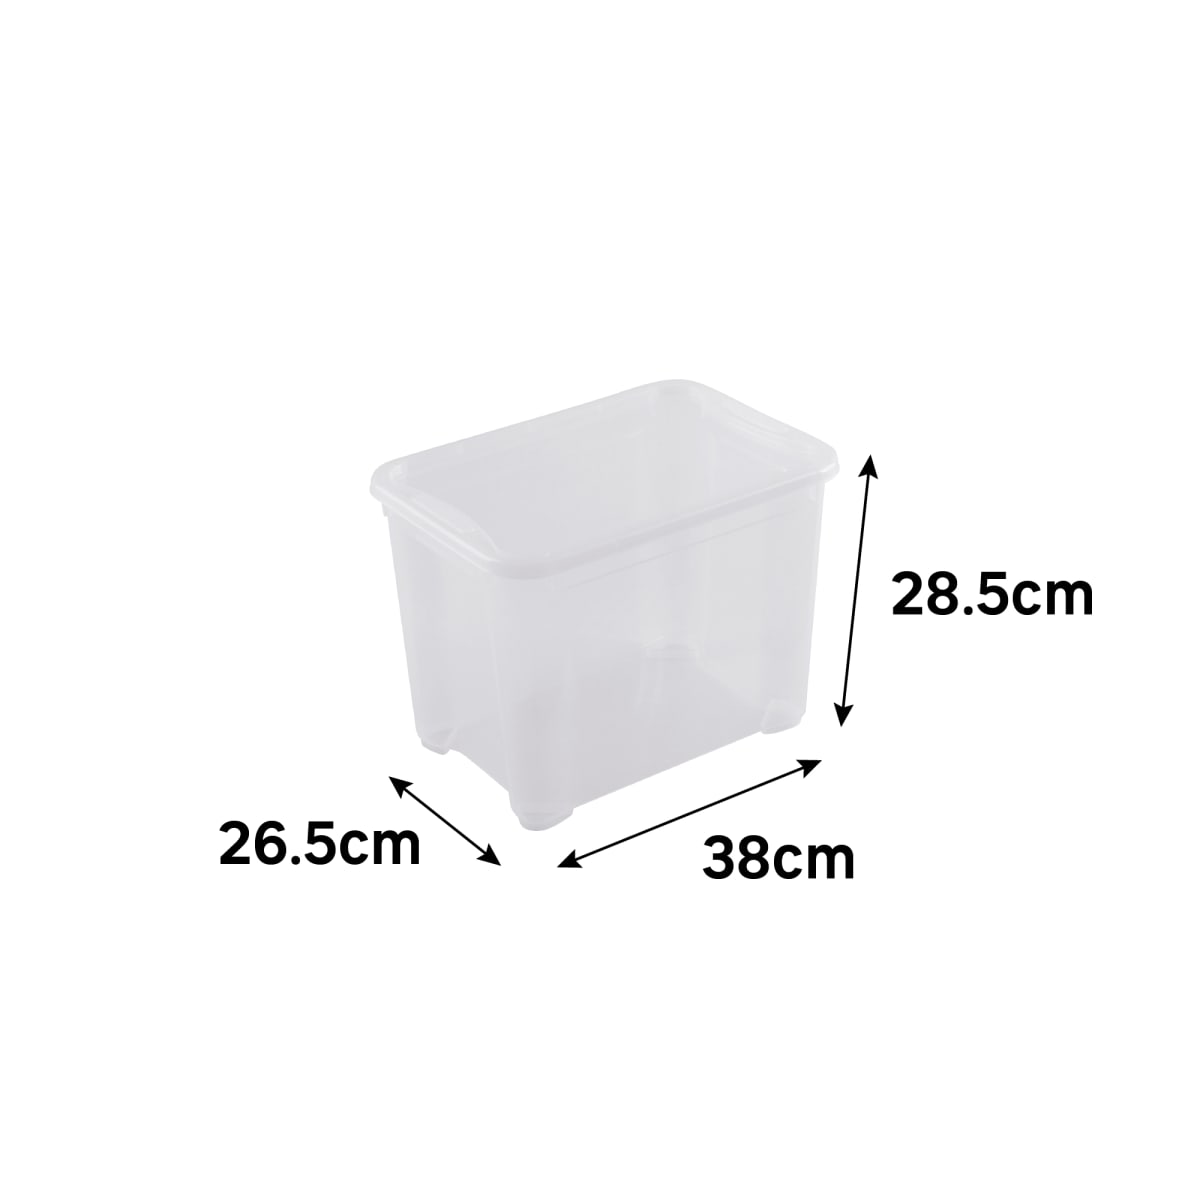 CONTAINER WITH LID T-BOX S W38xD26.5xH28.5CM 18LT TRANSPARENT PLASTIC LID